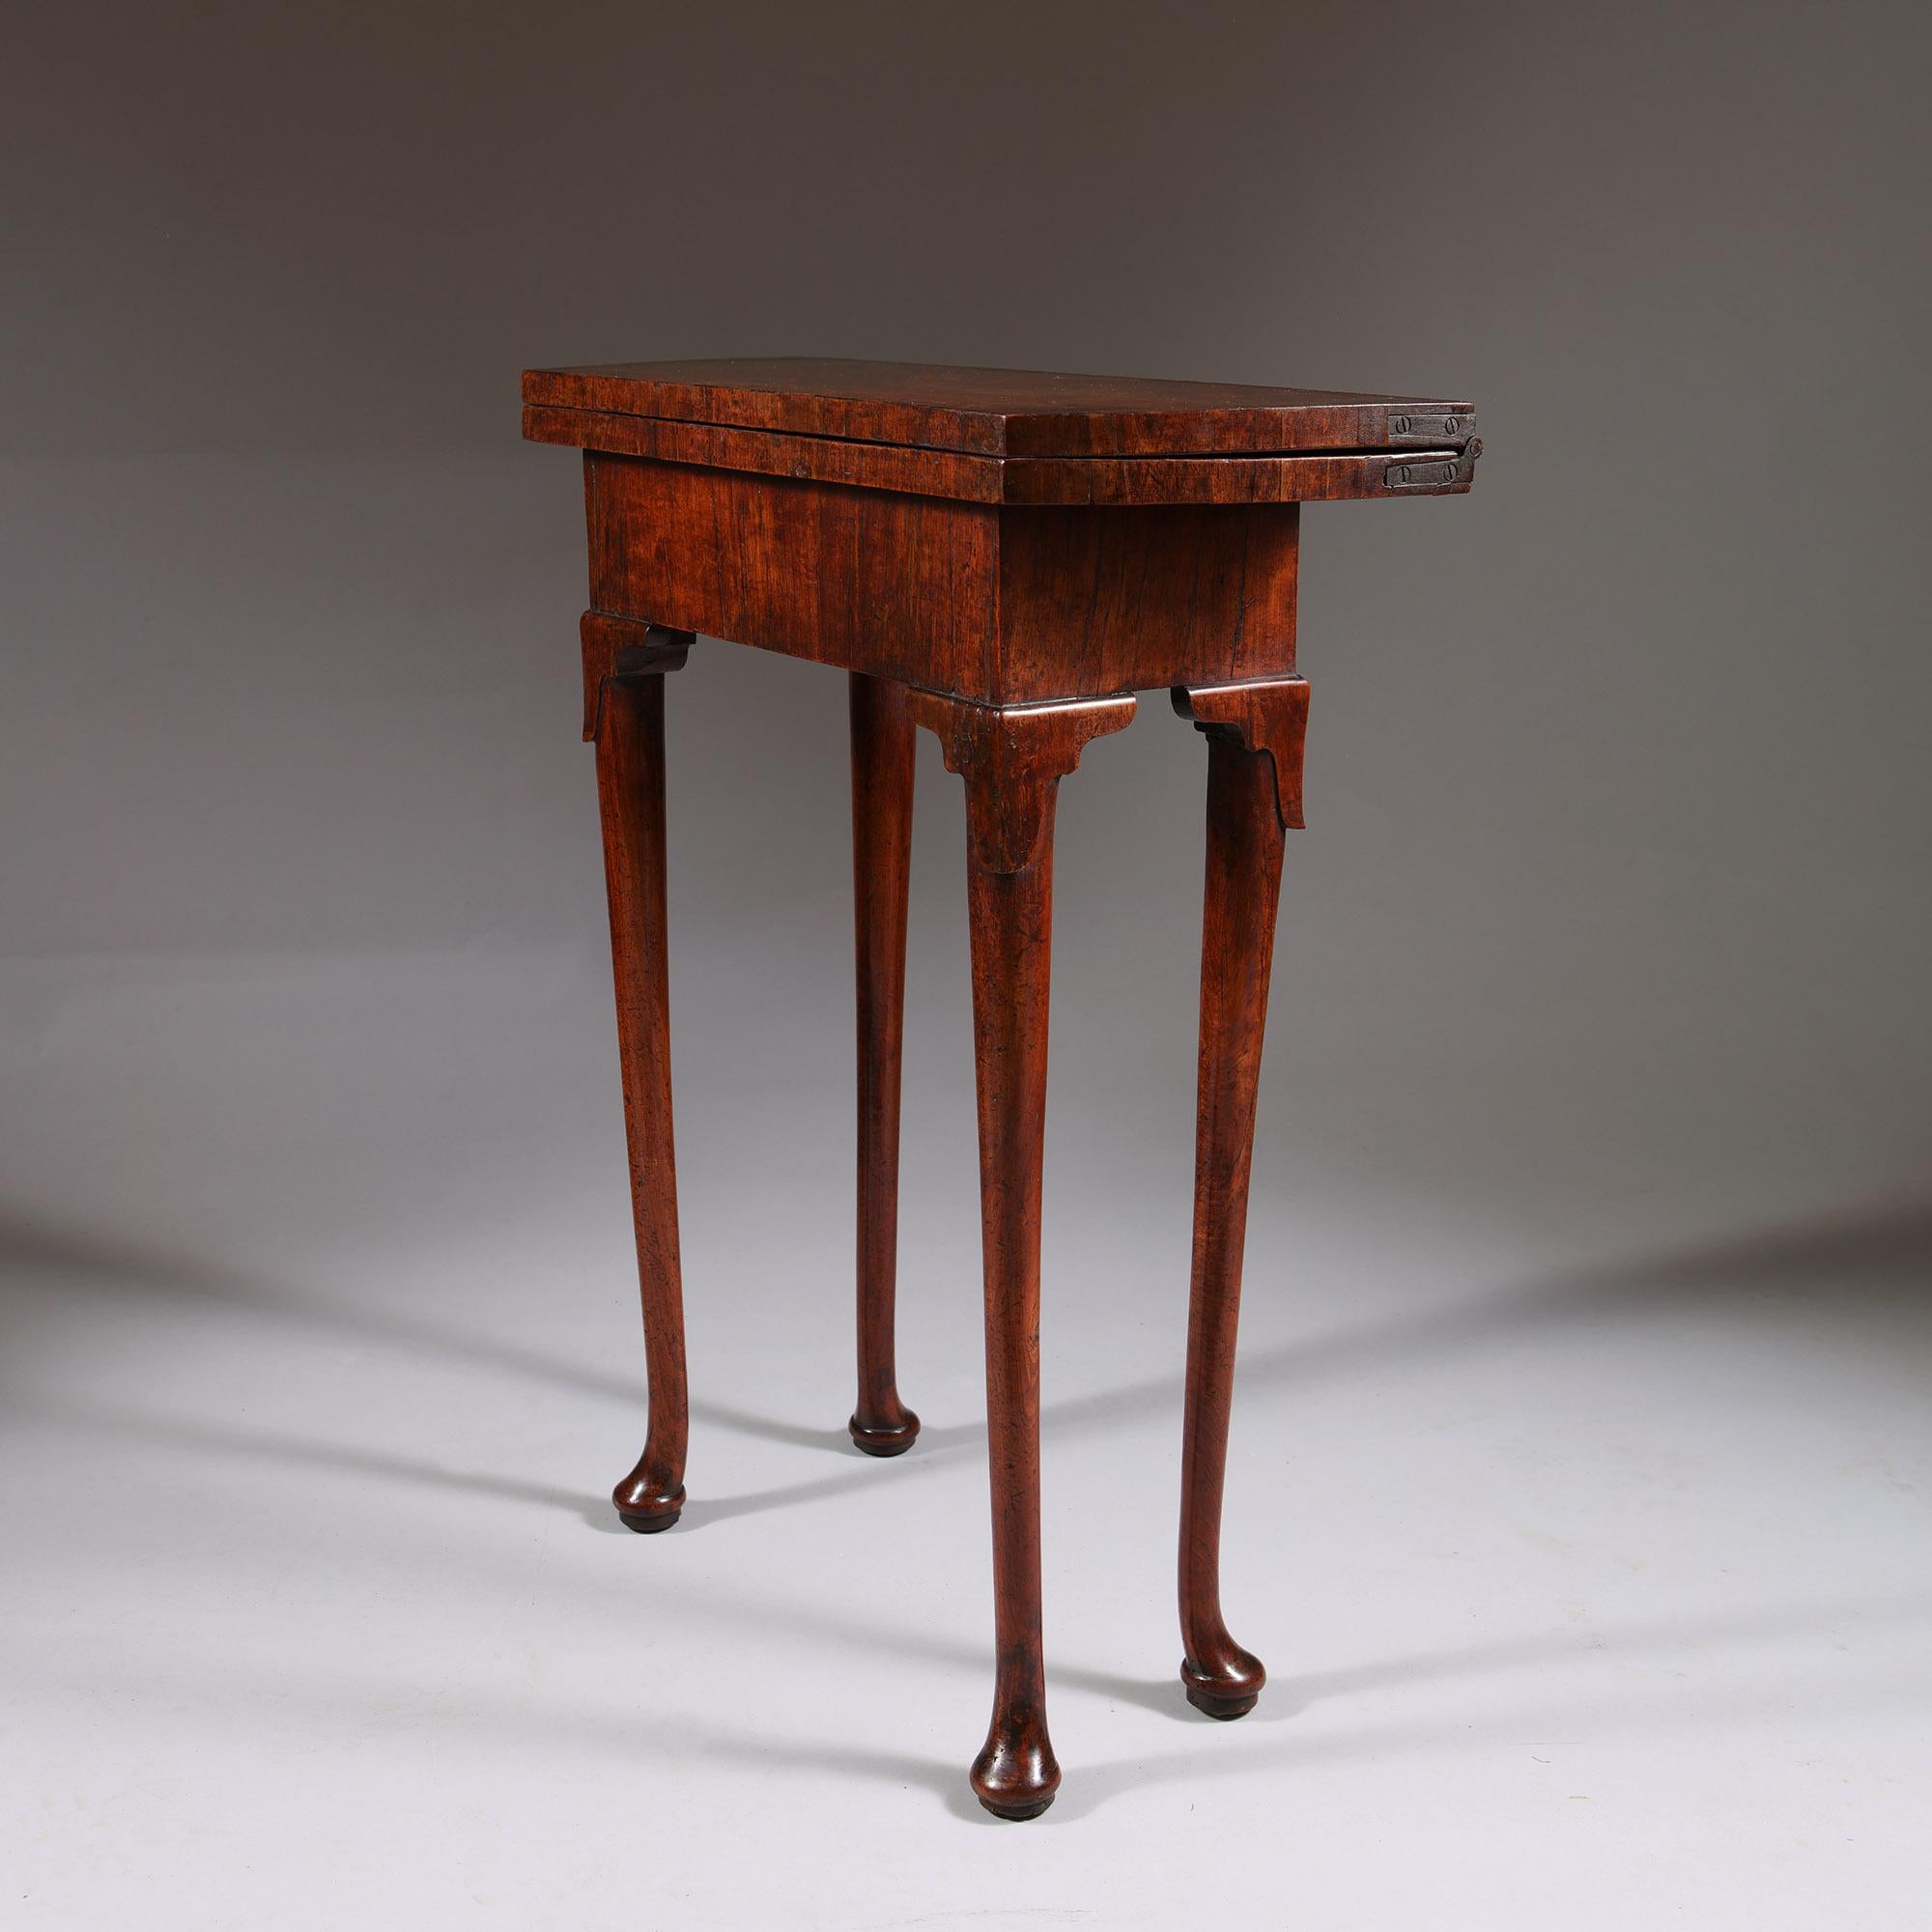 A Unique Early 18th Century Diminutive George I Figured Walnut Bachelors Table For Sale 3